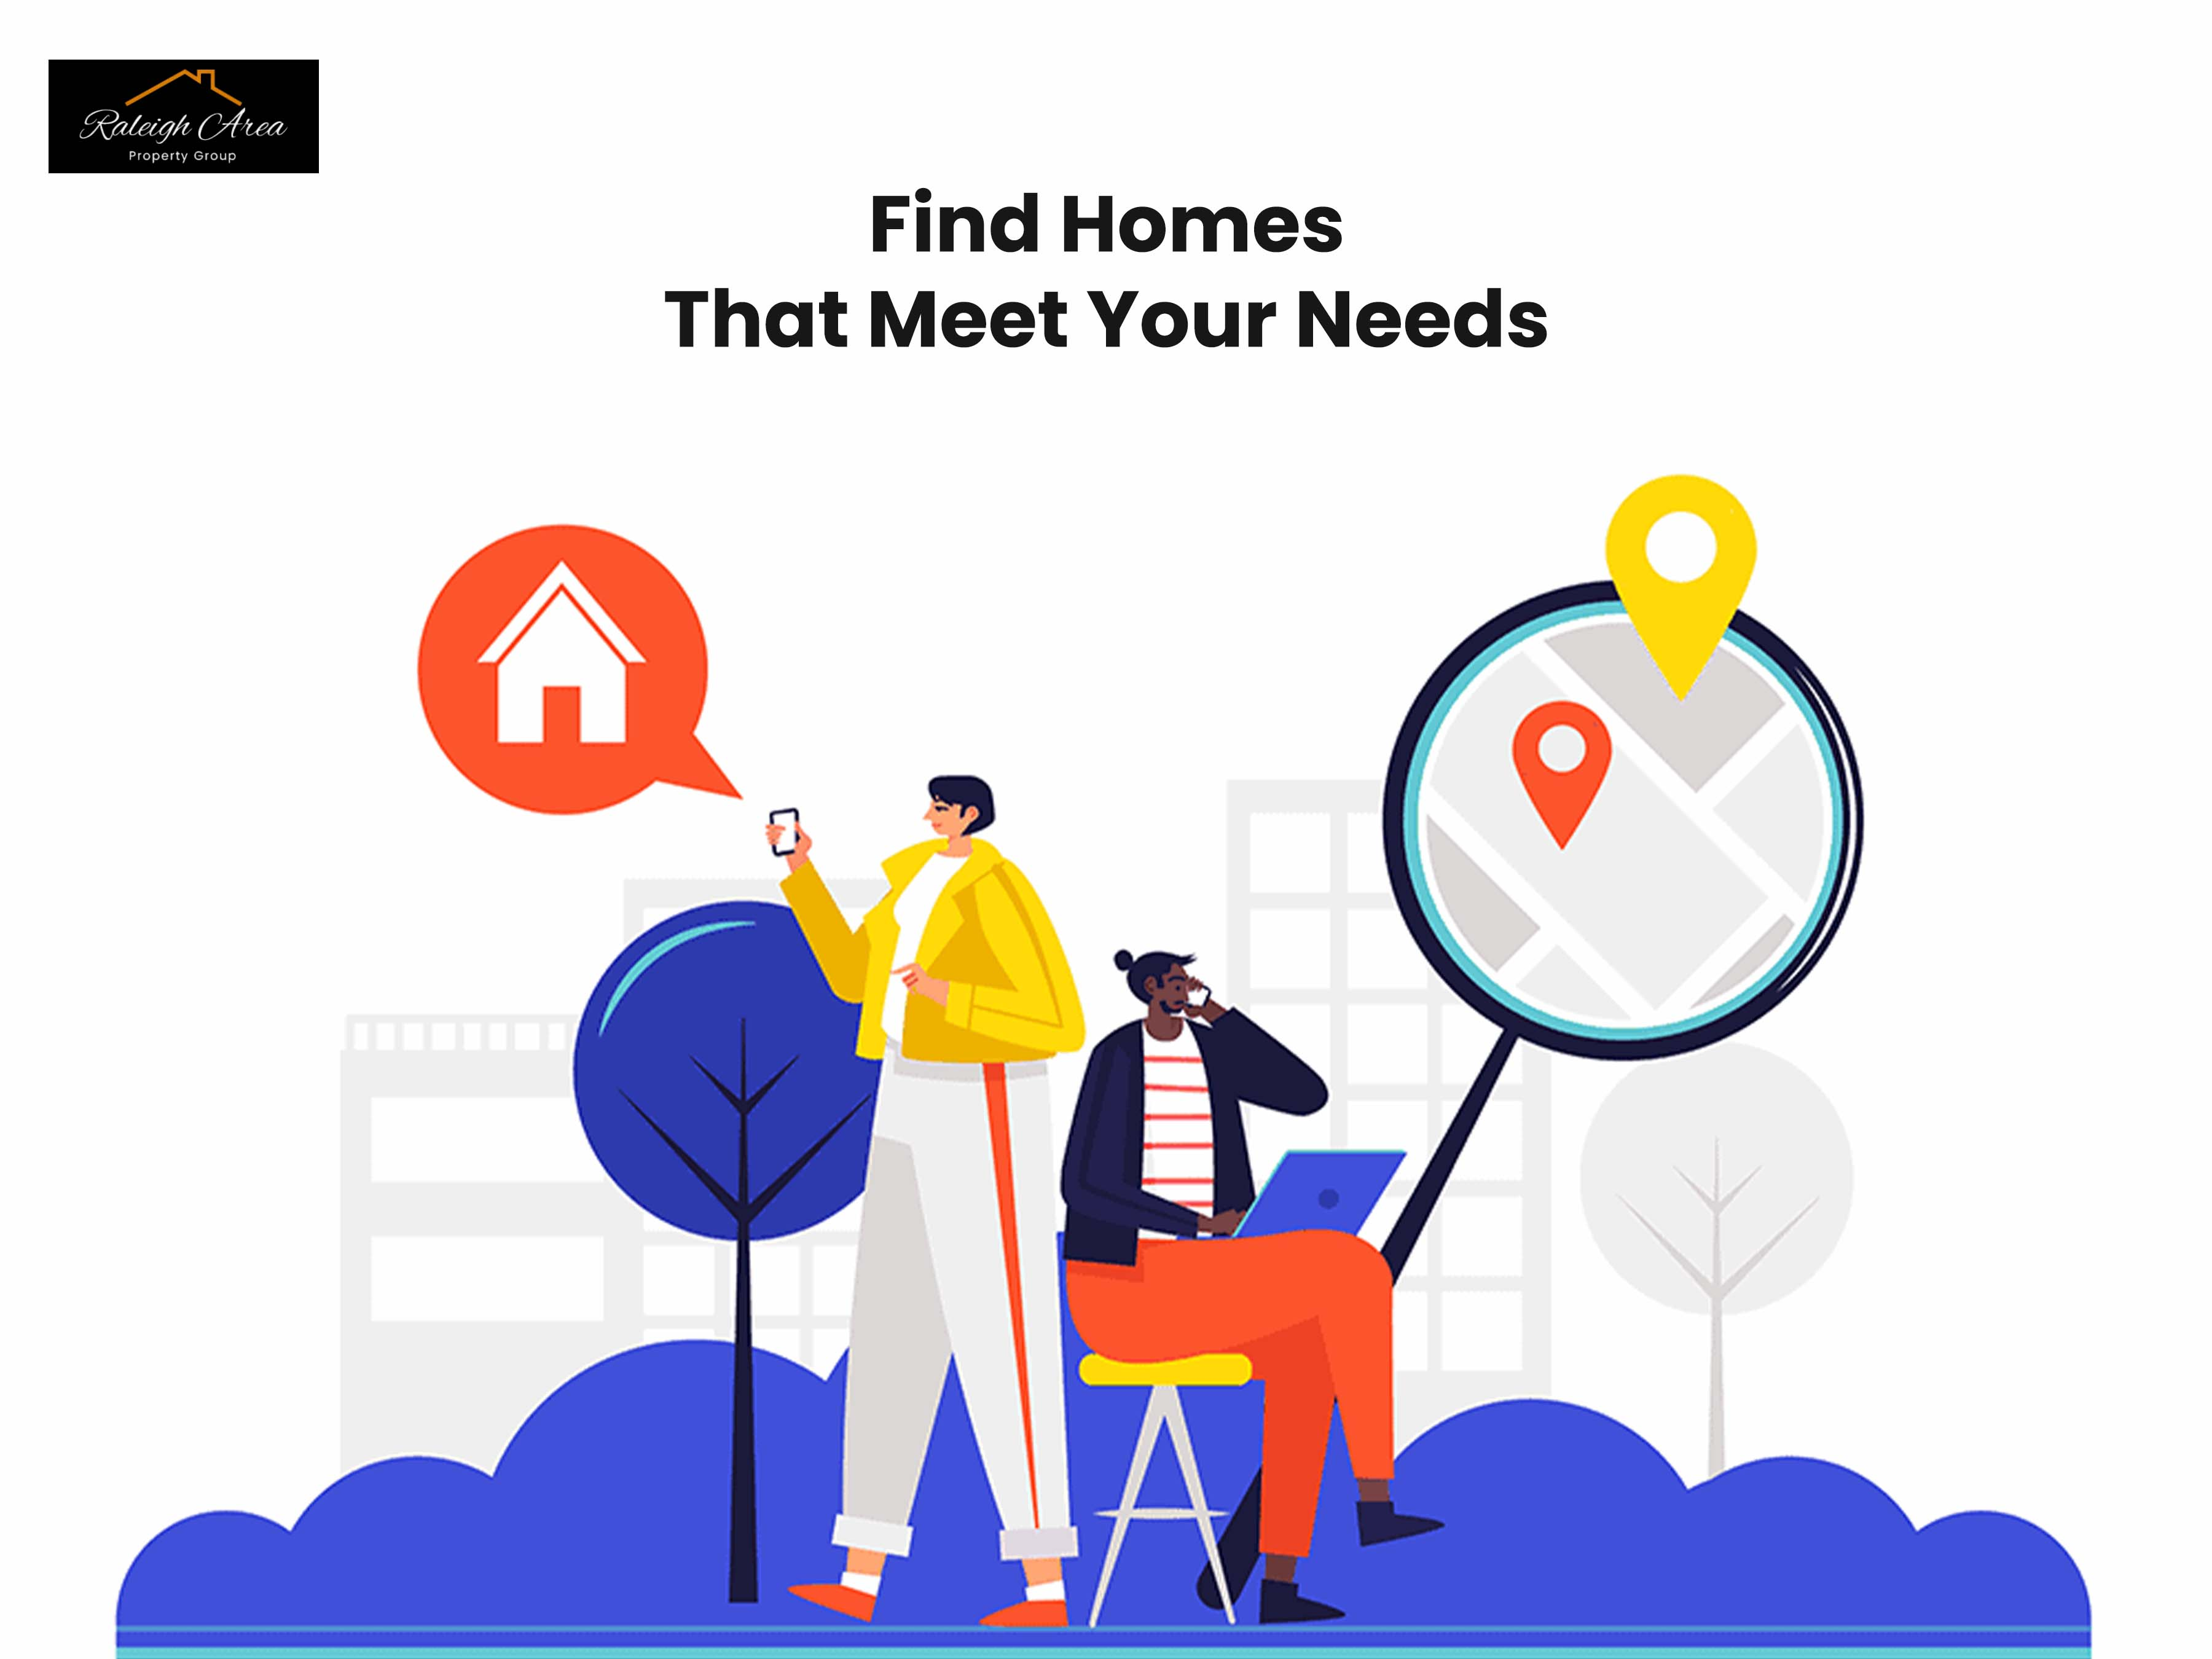 Find Homes That Meet Your Needs